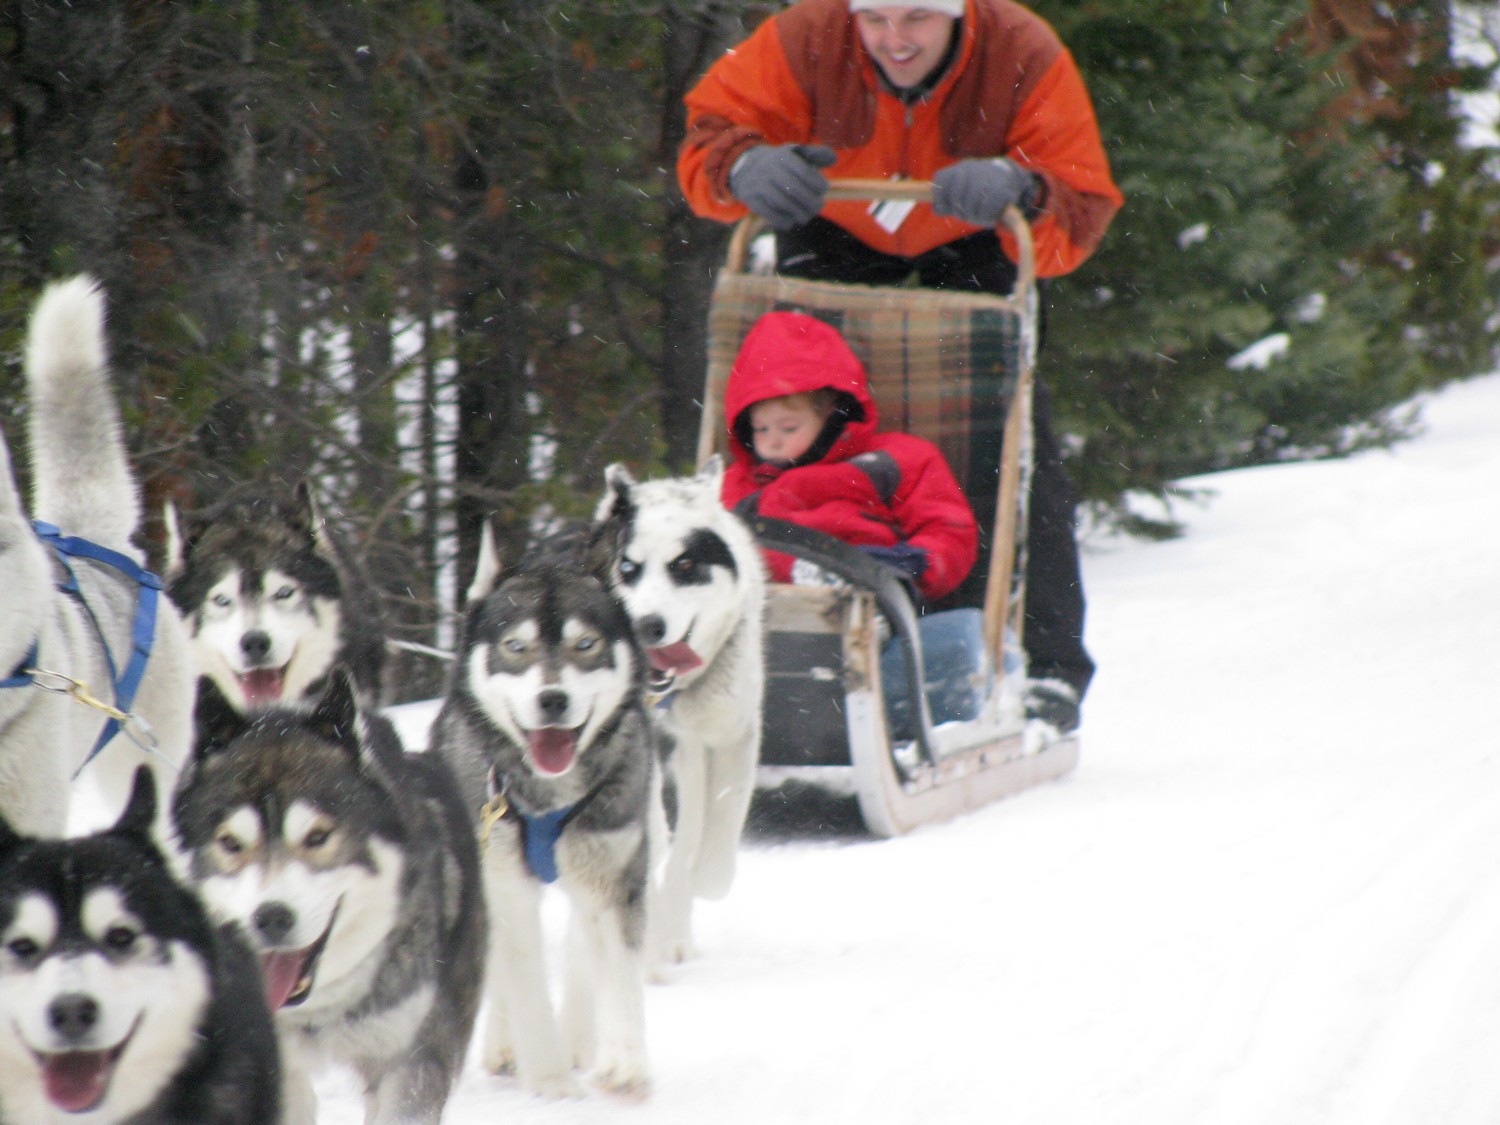 Dog sledding is one of the non-skiing activities at Breckenridge, where you can also get a free Mining Tour with a mountain ski ambassador © 2016 Eric Leiberman/goingplacesfarandnear.com